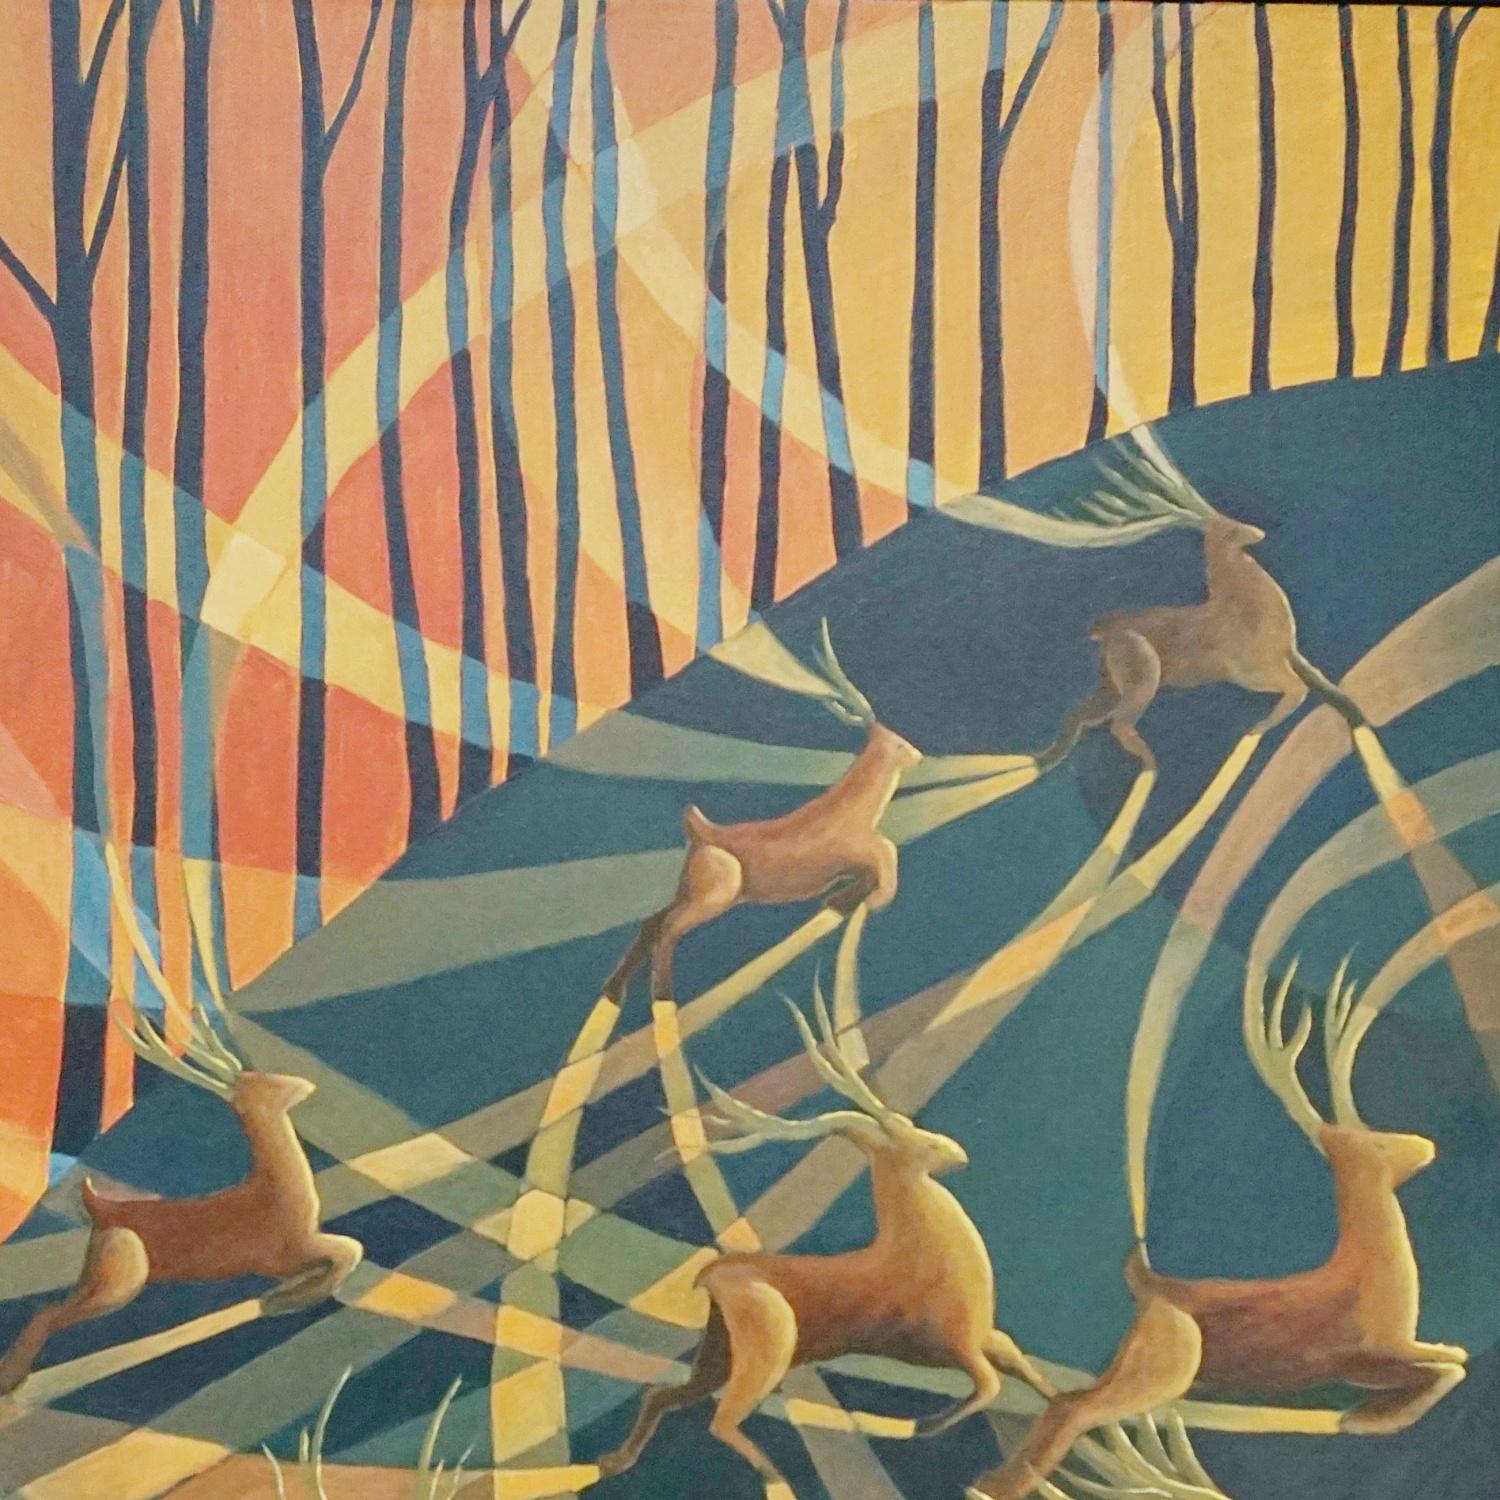 An Art Deco Style Contemporary painting by Vera Jefferson depicting a herd of Deer running across an abstract forest. Signed V Jefferson to lower right. 

Dimensions: H 79cm W 54cm D 6cm

Origin: English

Date: Contemporary 

Vera Jefferson